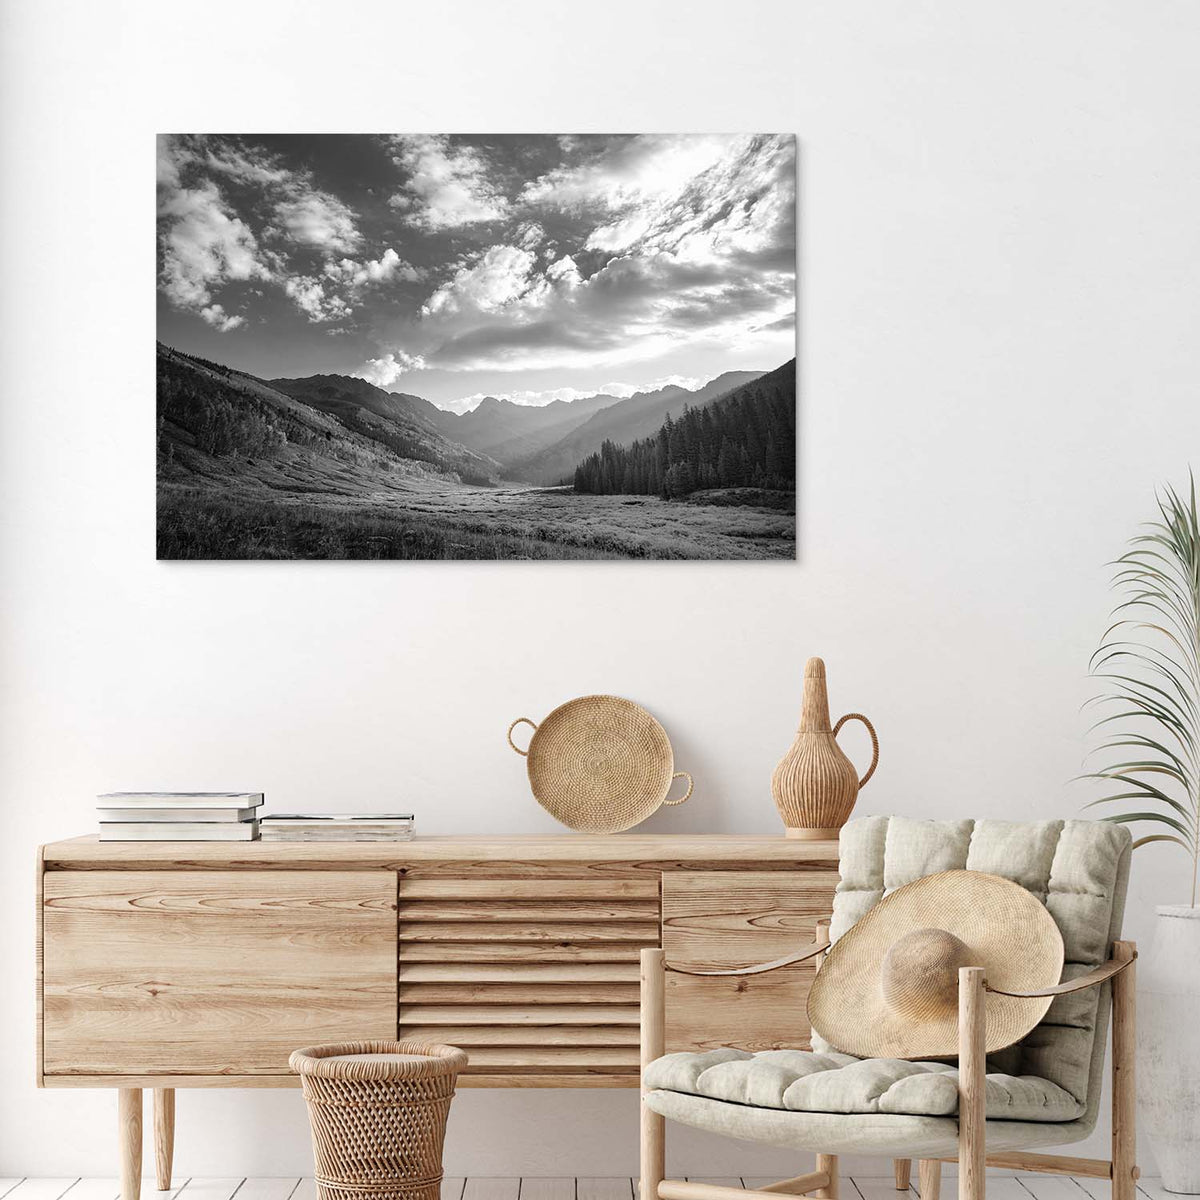 Morning Light at Piney - Canvas Print by Emily Kent | Art Bloom Canvas Art